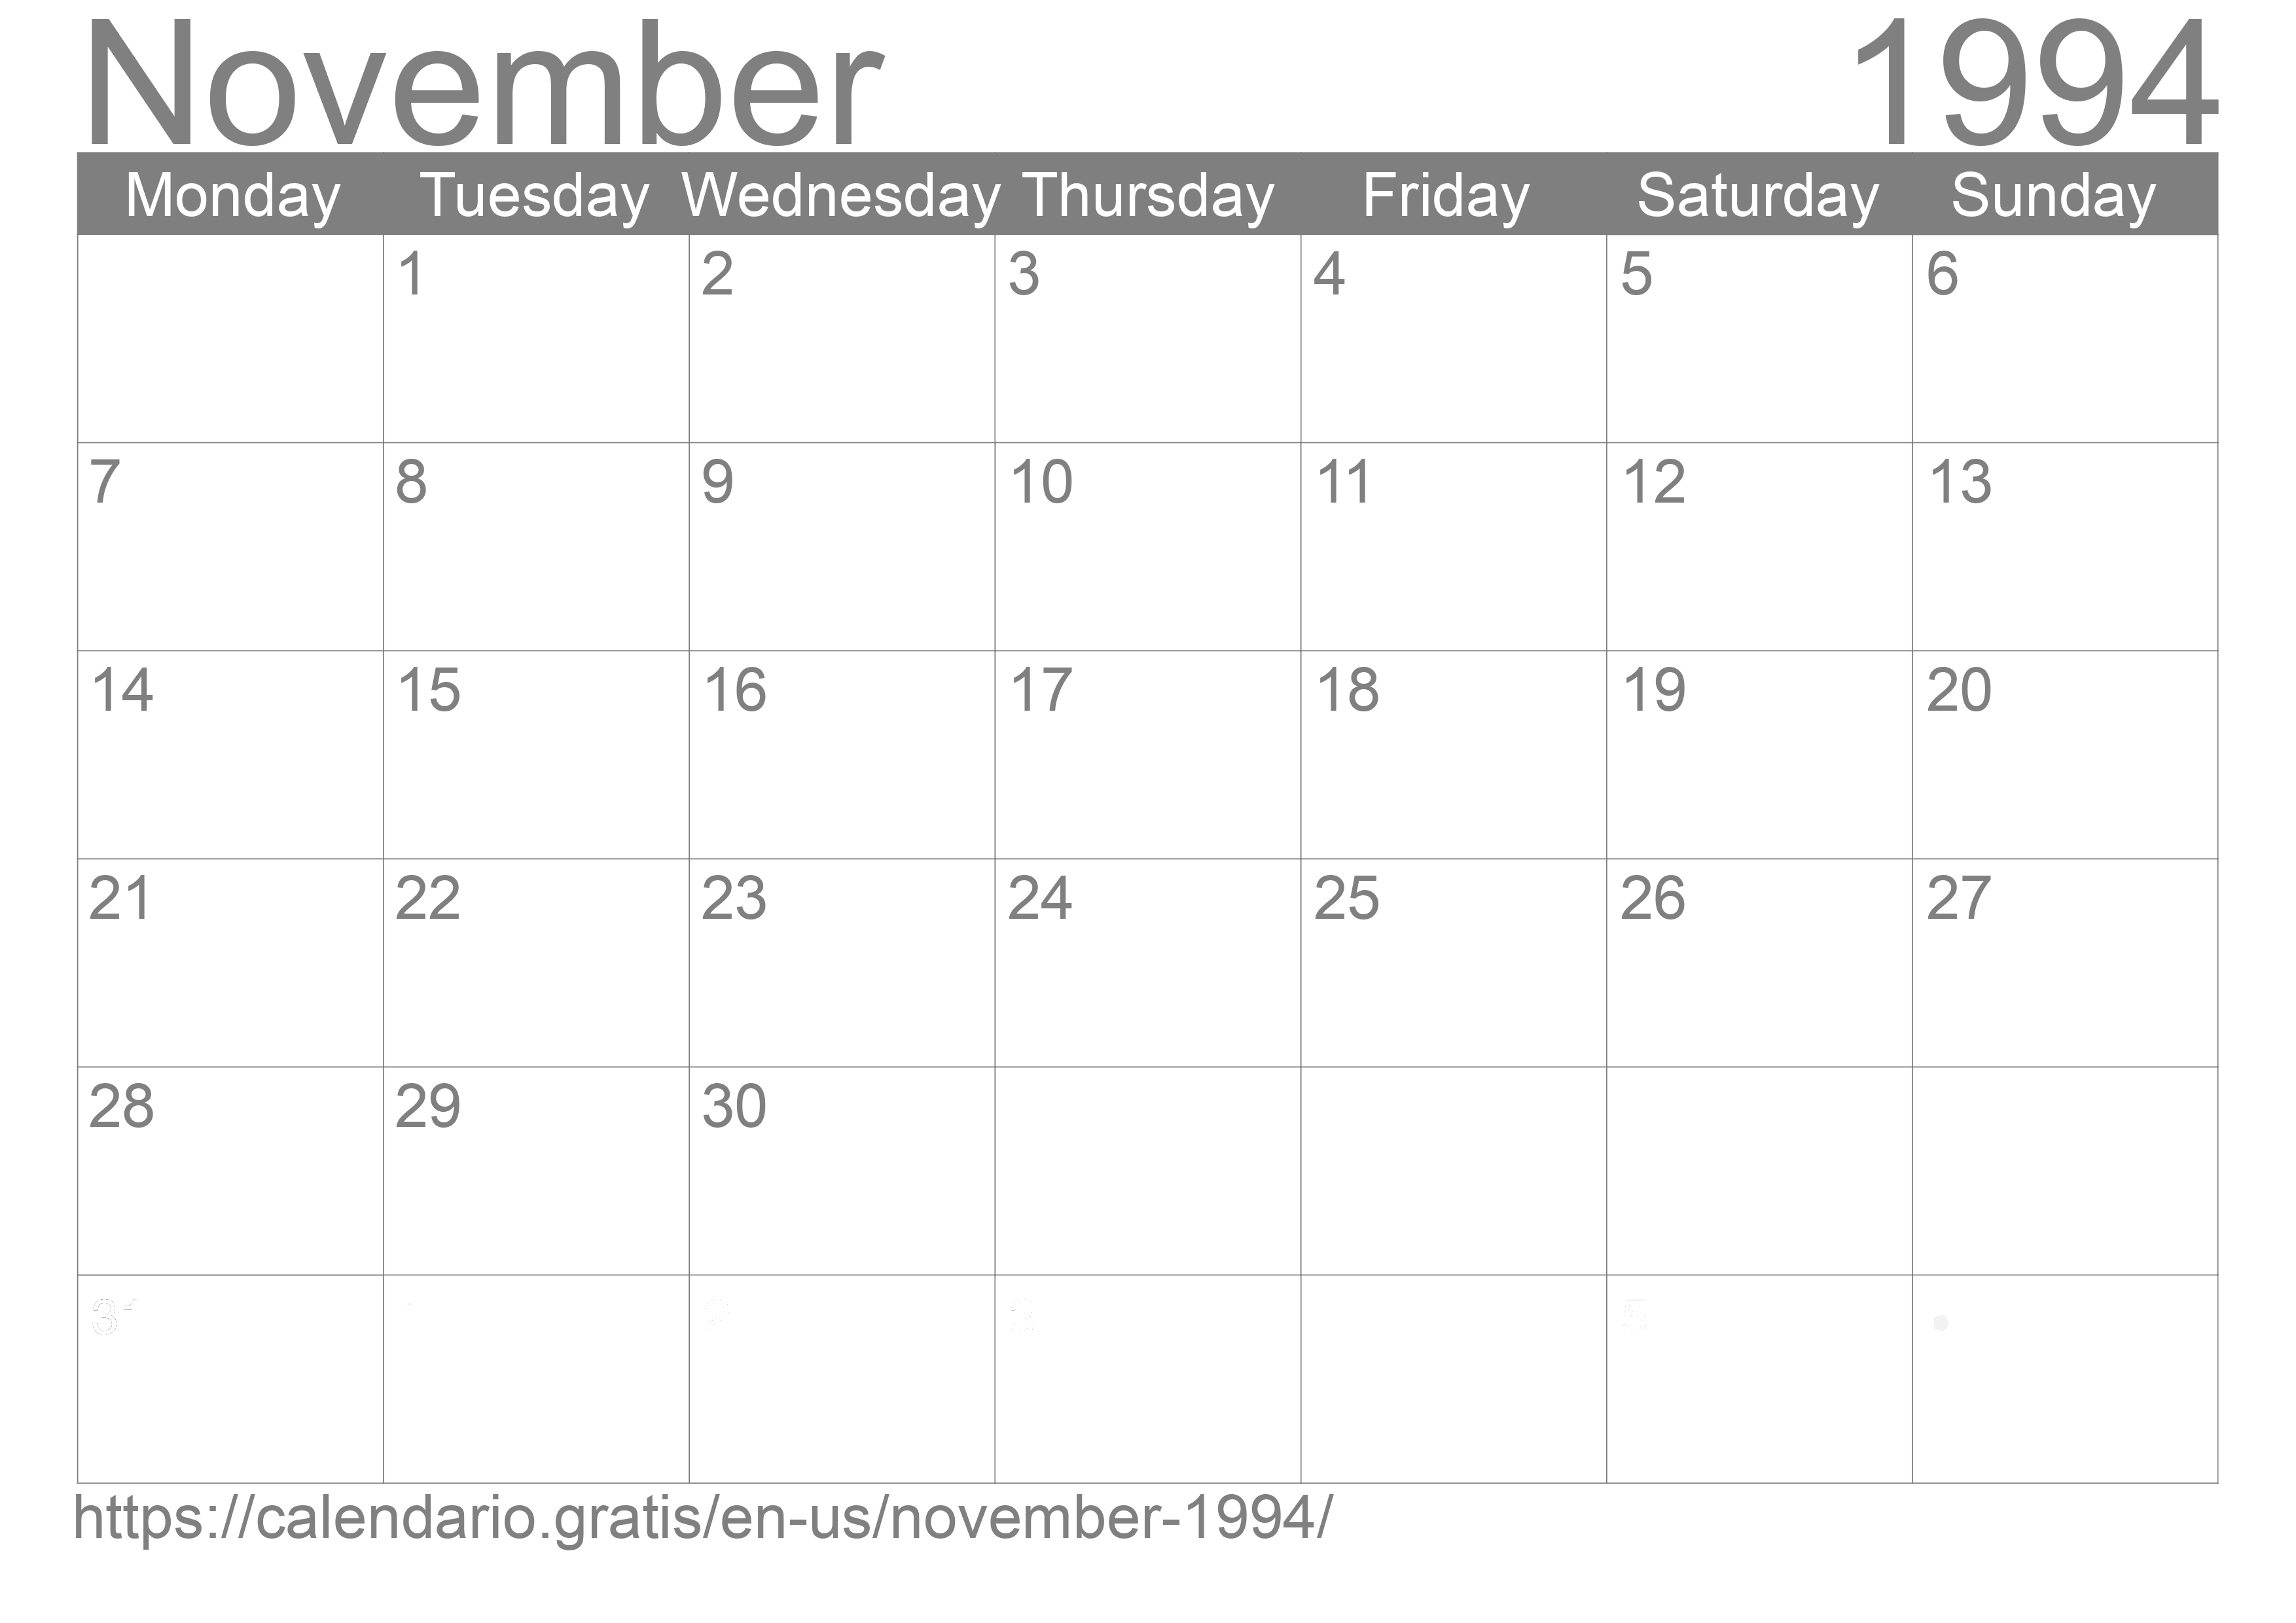 Calendar November 1994 from United States of America in English ☑️